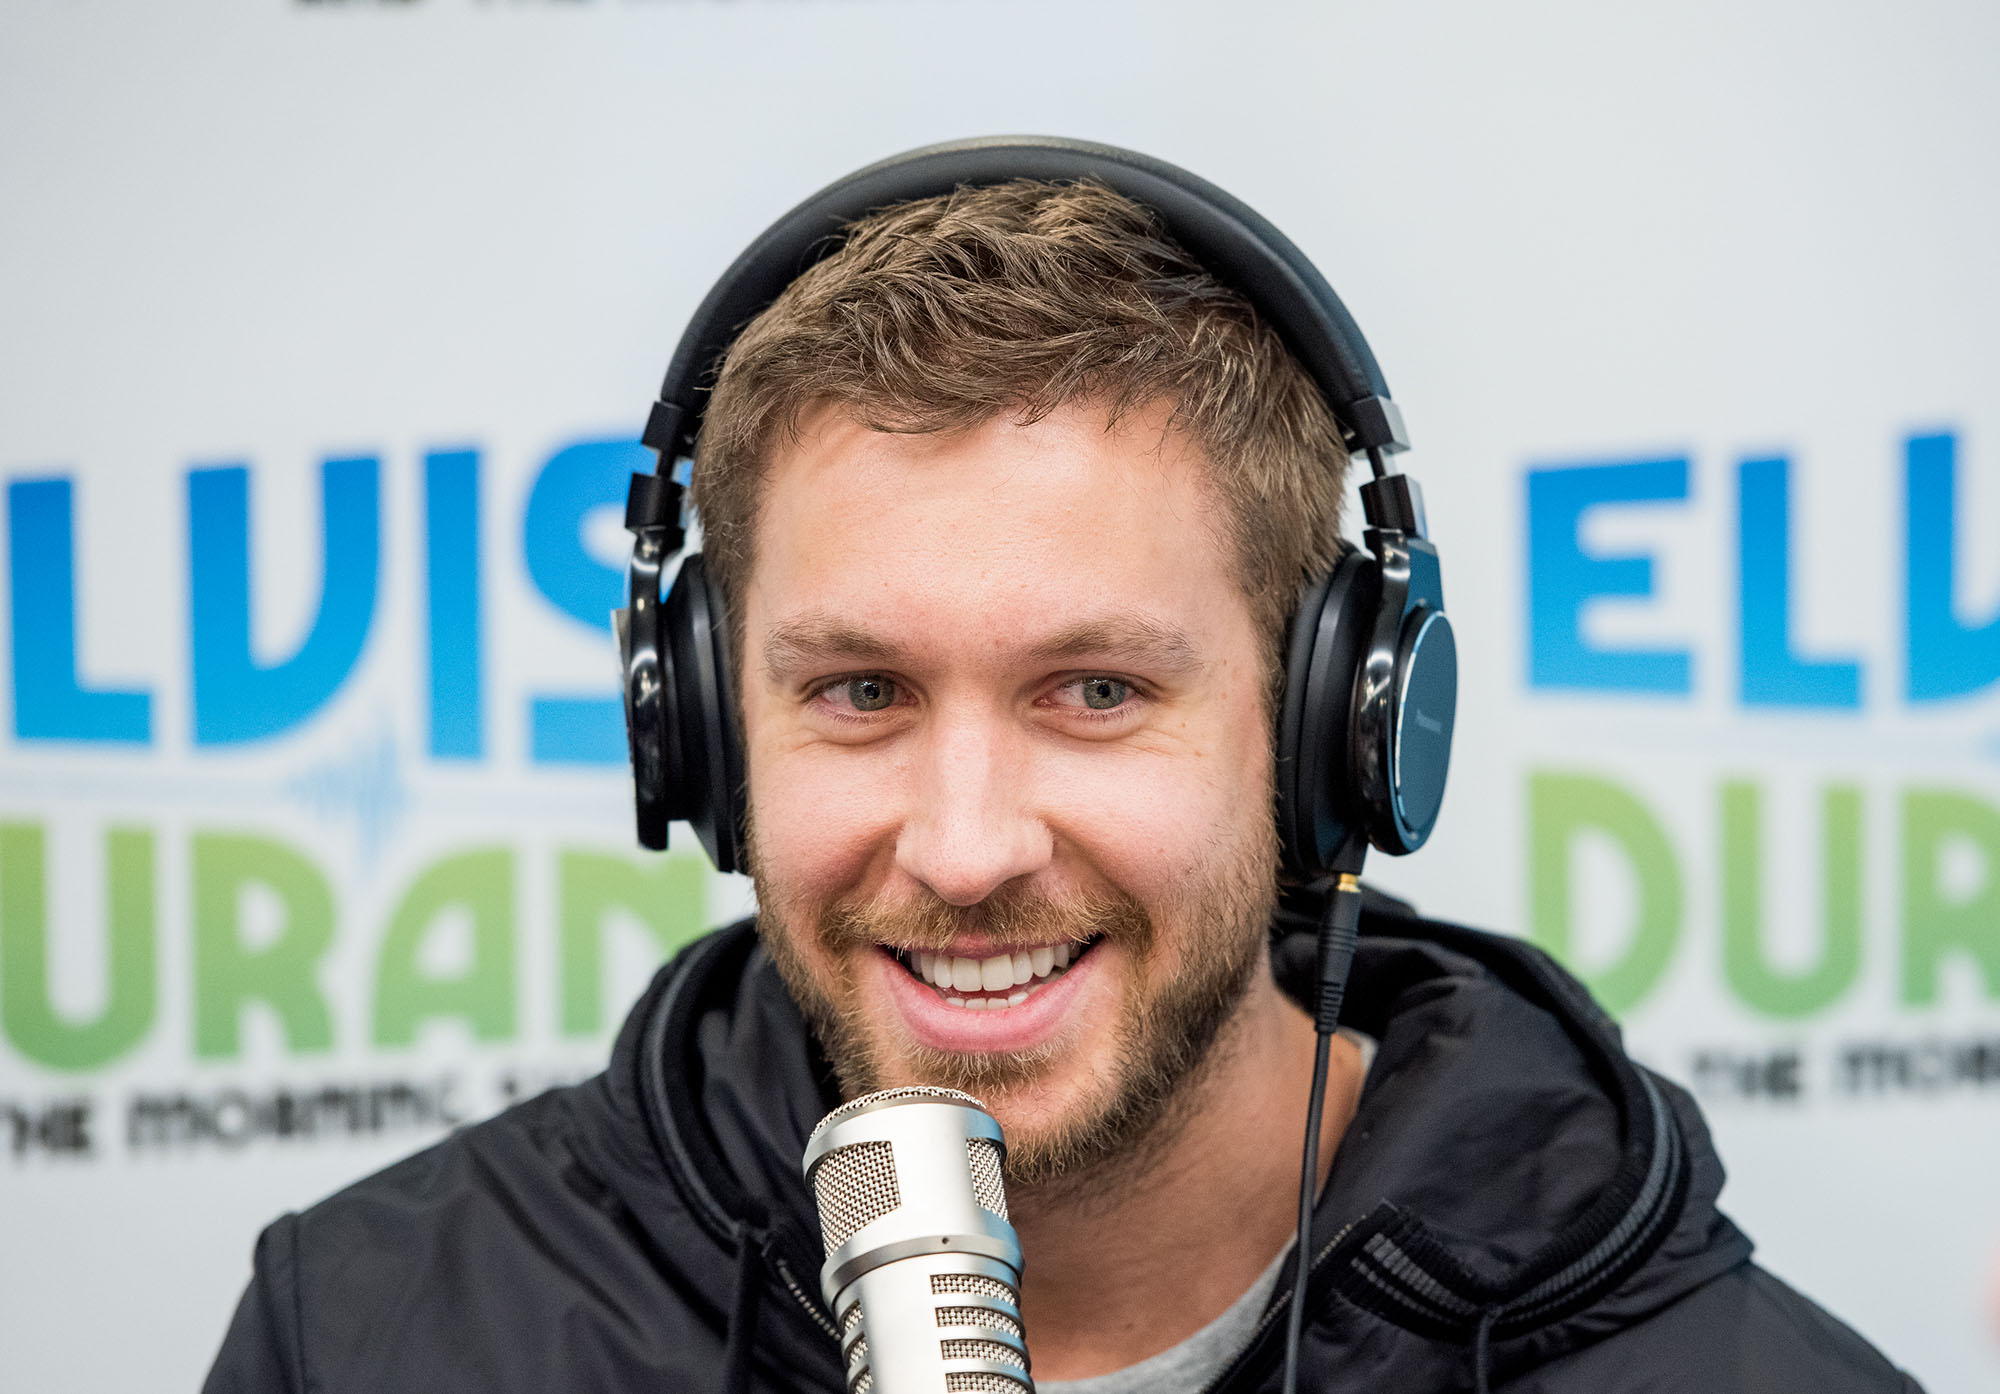 Calvin Harris Visits "The Elvis Duran Z100 Morning Show" at Z100 Studio on September 14, 2016 in New York City.  (Photo by Roy Rochlin/Getty Images) (Roy Rochlin&mdash;Getty Images)